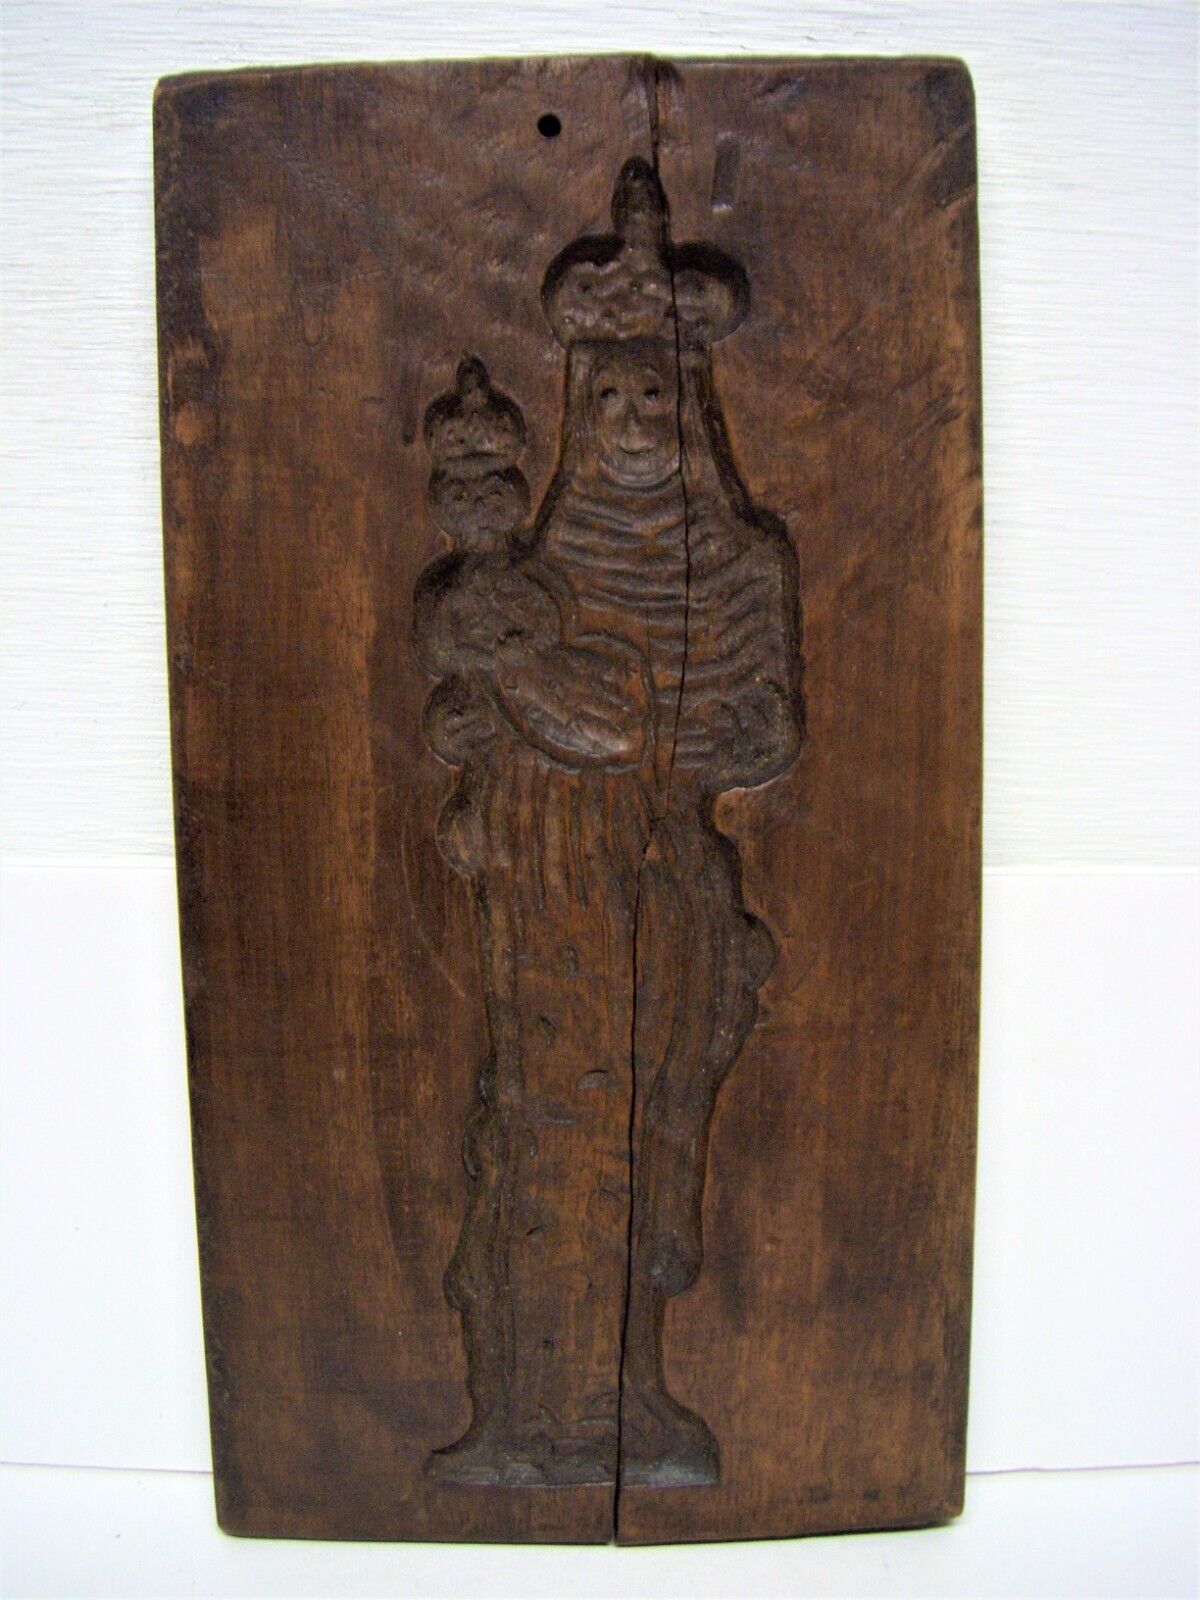 Antique Hand Carved Wooden Candy/Cookie Mold - Mary & Baby Jesus w/ Crowns